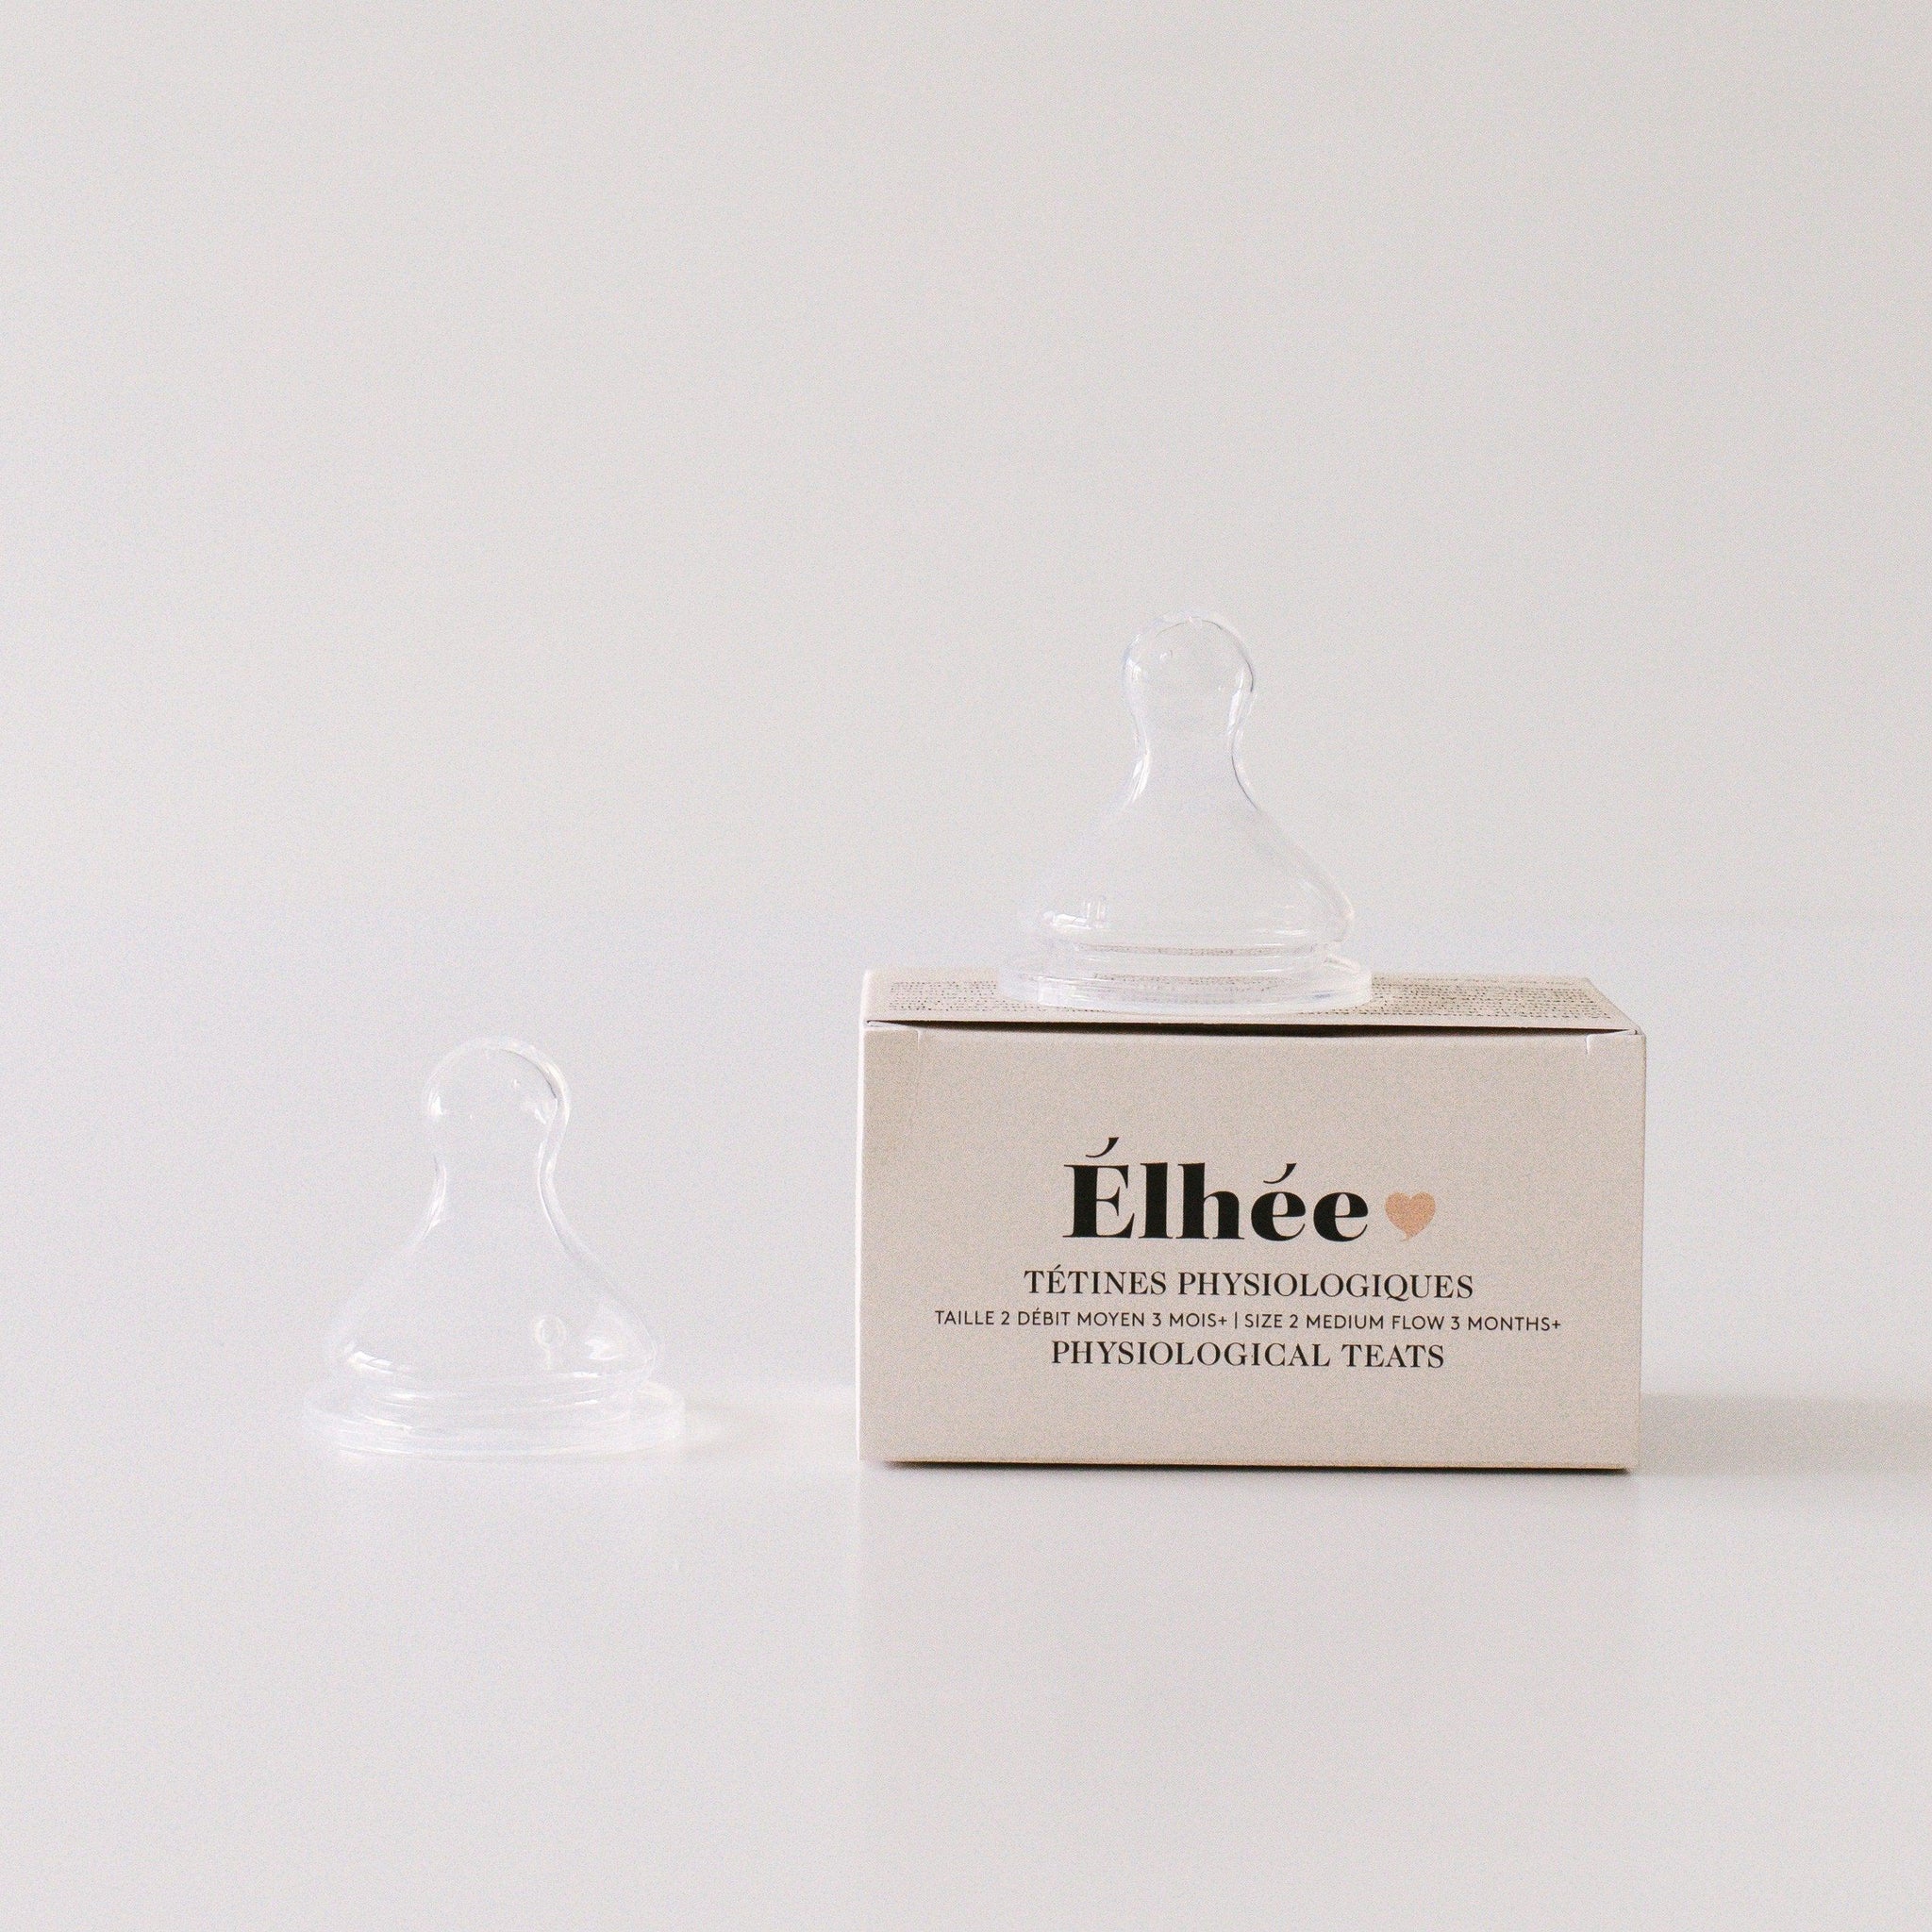 Physiological and anti-colic Elhee teat, made of extra-soft silicone, has been developed to offer sensations close to breastfeeding. It adapts ideally to the shape of the baby’s palate and contributes to its good oral development. Its anti-colic system reduces air absorption and facilitates digestion in babies.